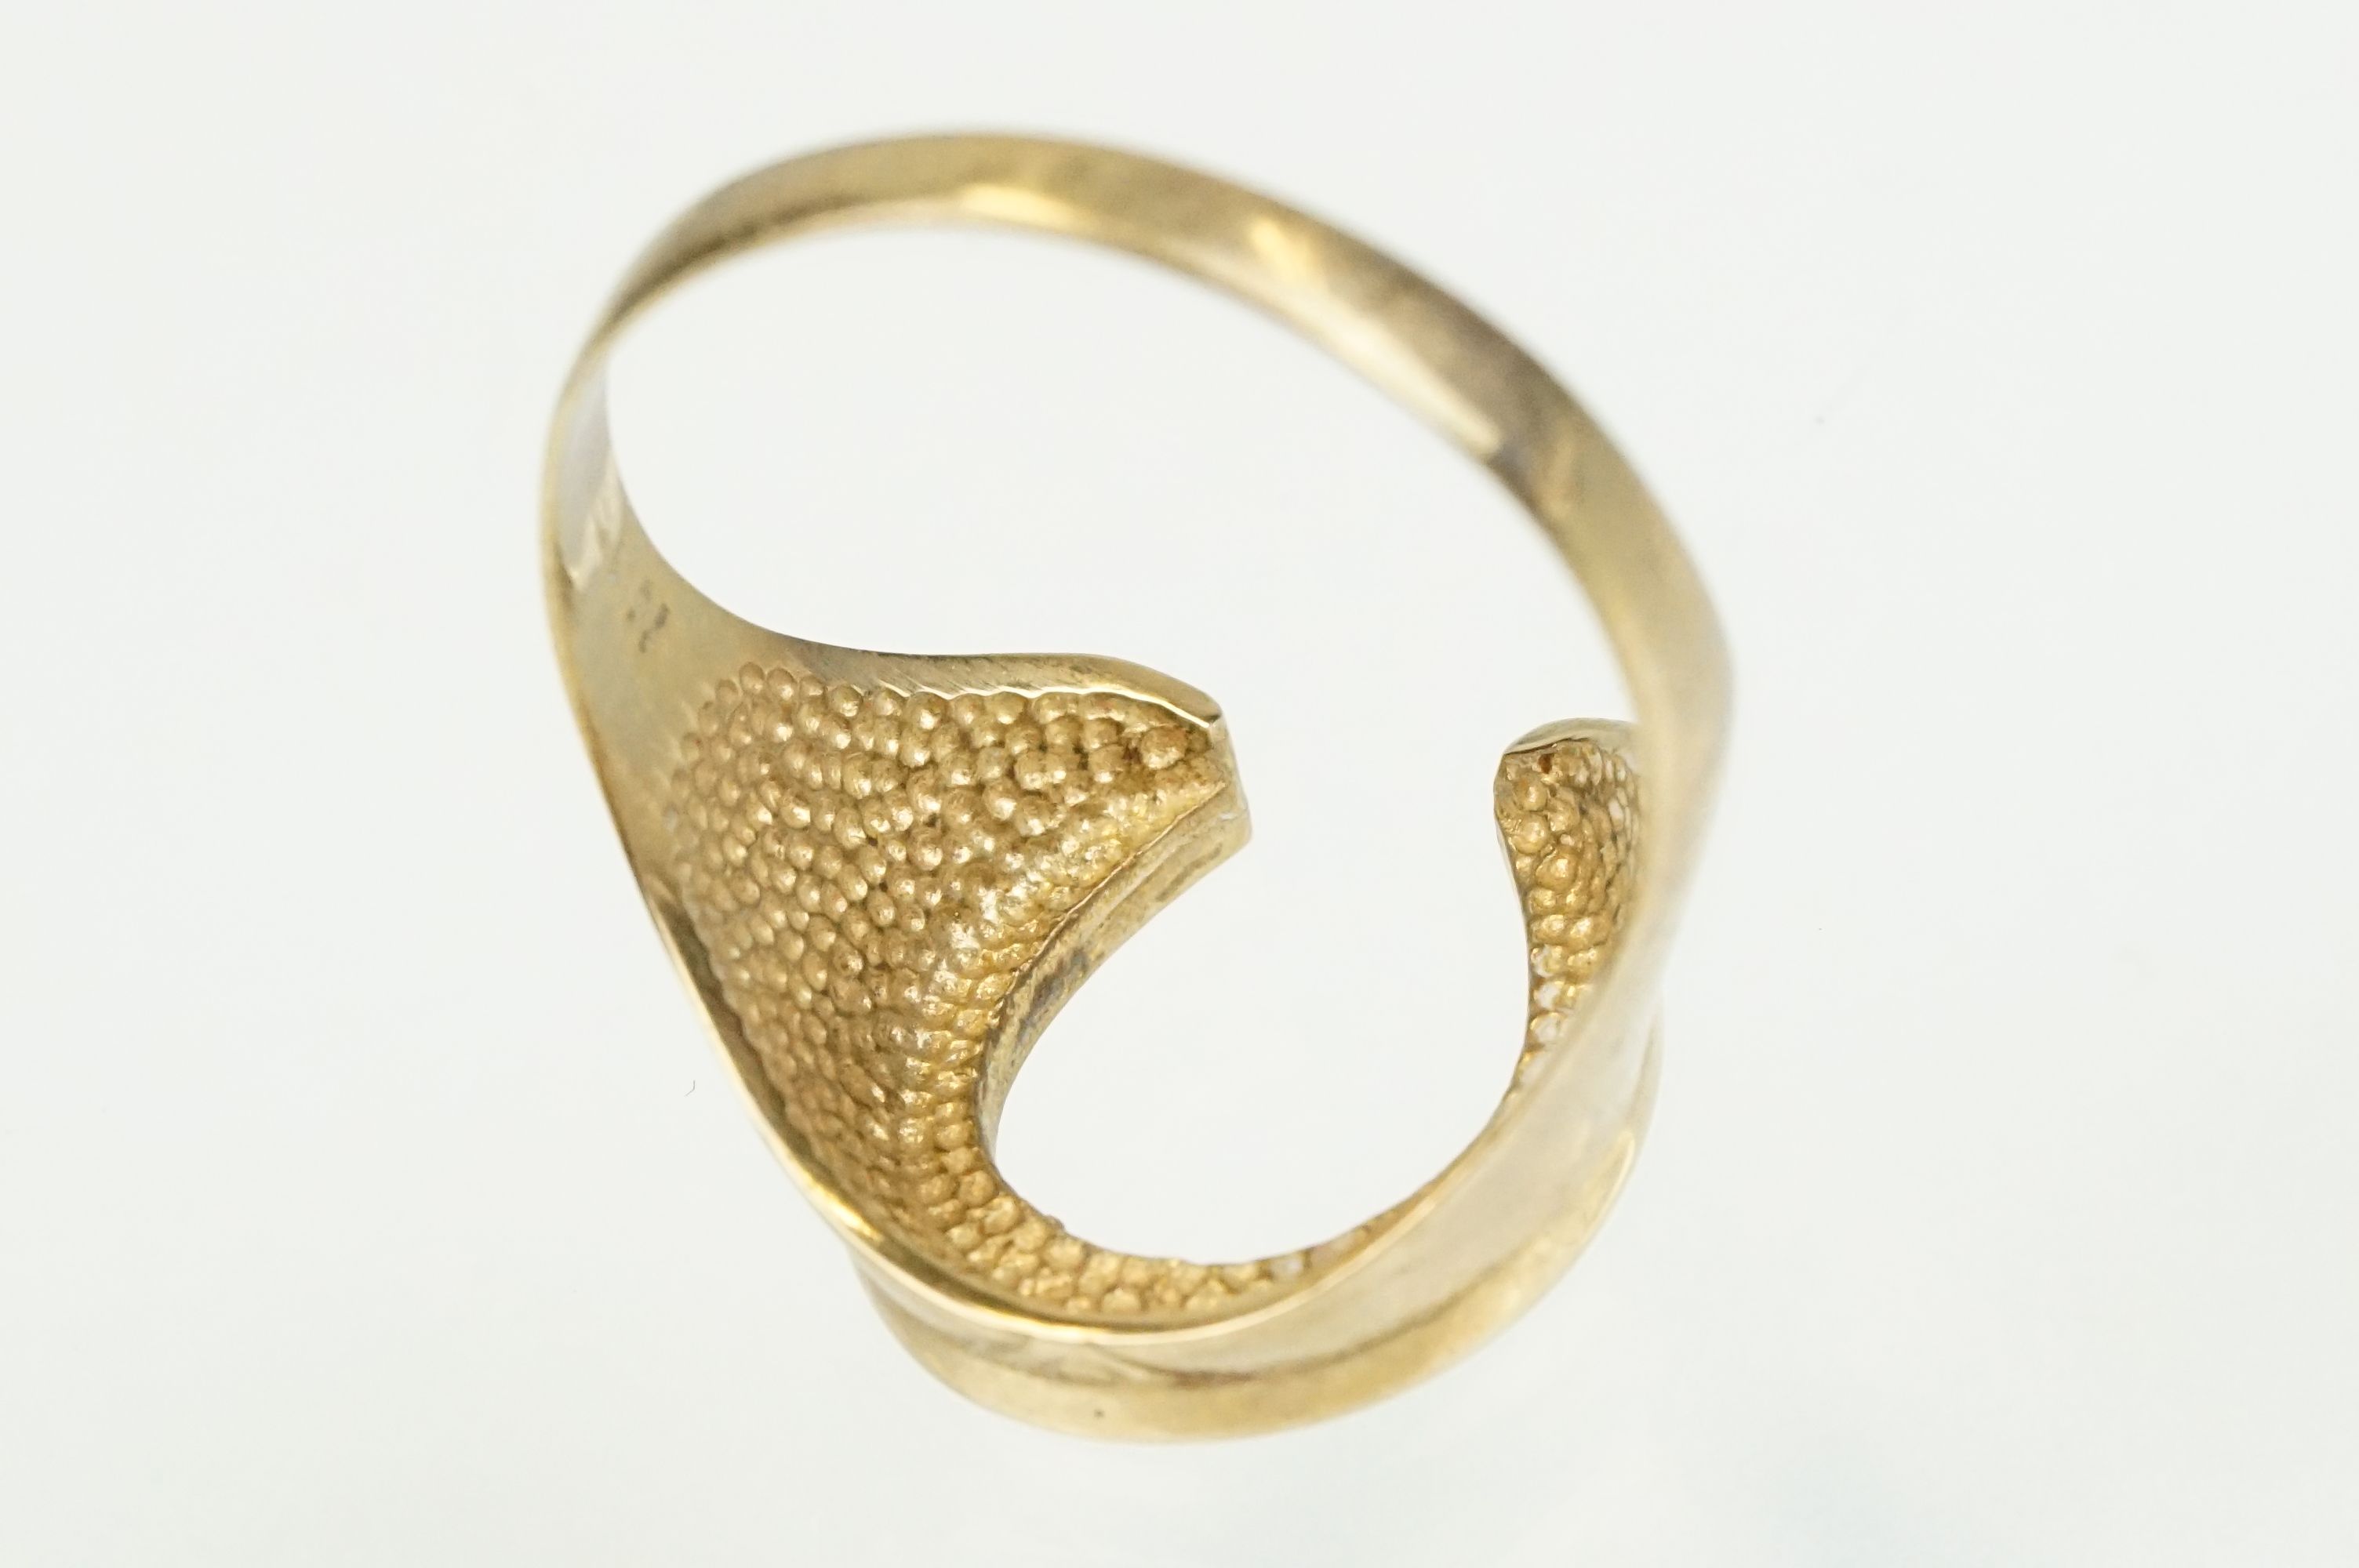 9ct gold horse shoe ring with moulded details. Hallmarked present but rubbed. Size S.5. - Image 6 of 8